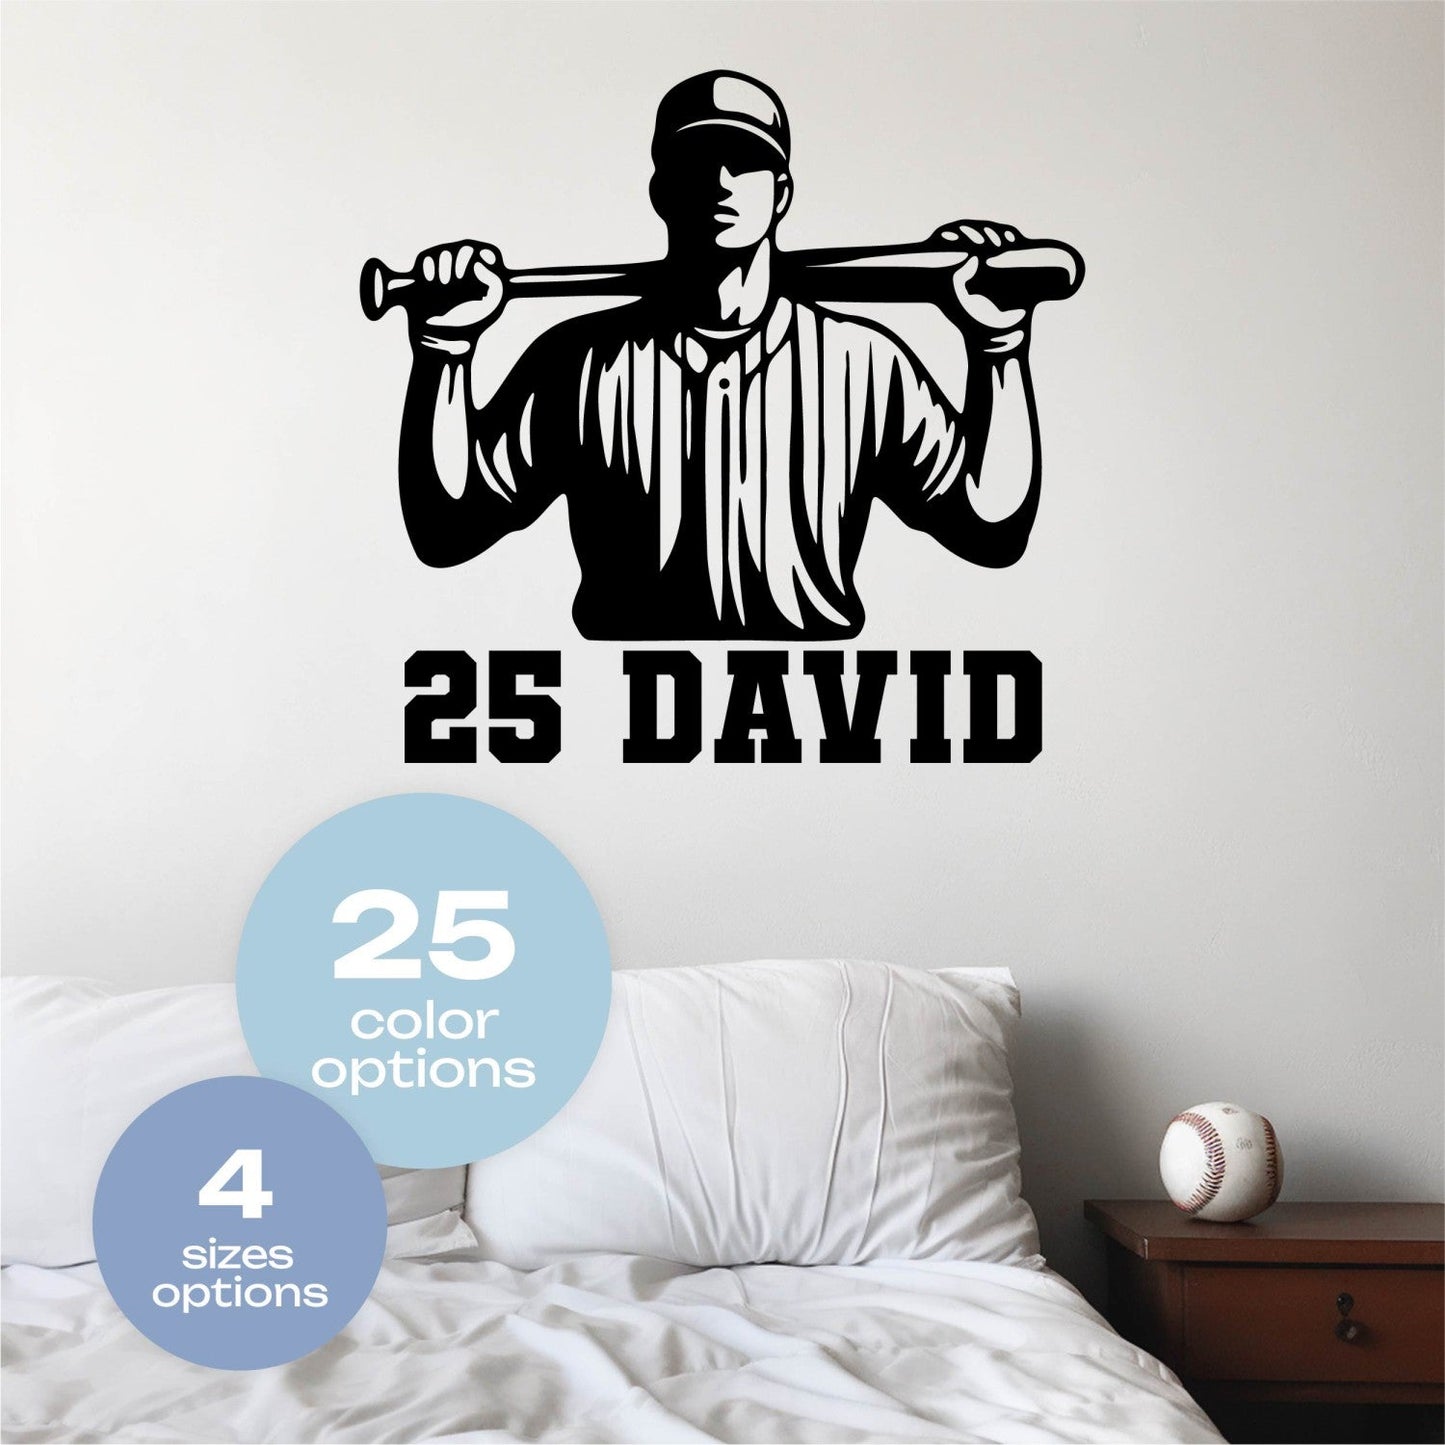 Baseball Wall Decals for Boys Room - Personalized Baseball Name Sticker - Custom Baseball Wall Decals - Sports Wall Decals for Boys Room